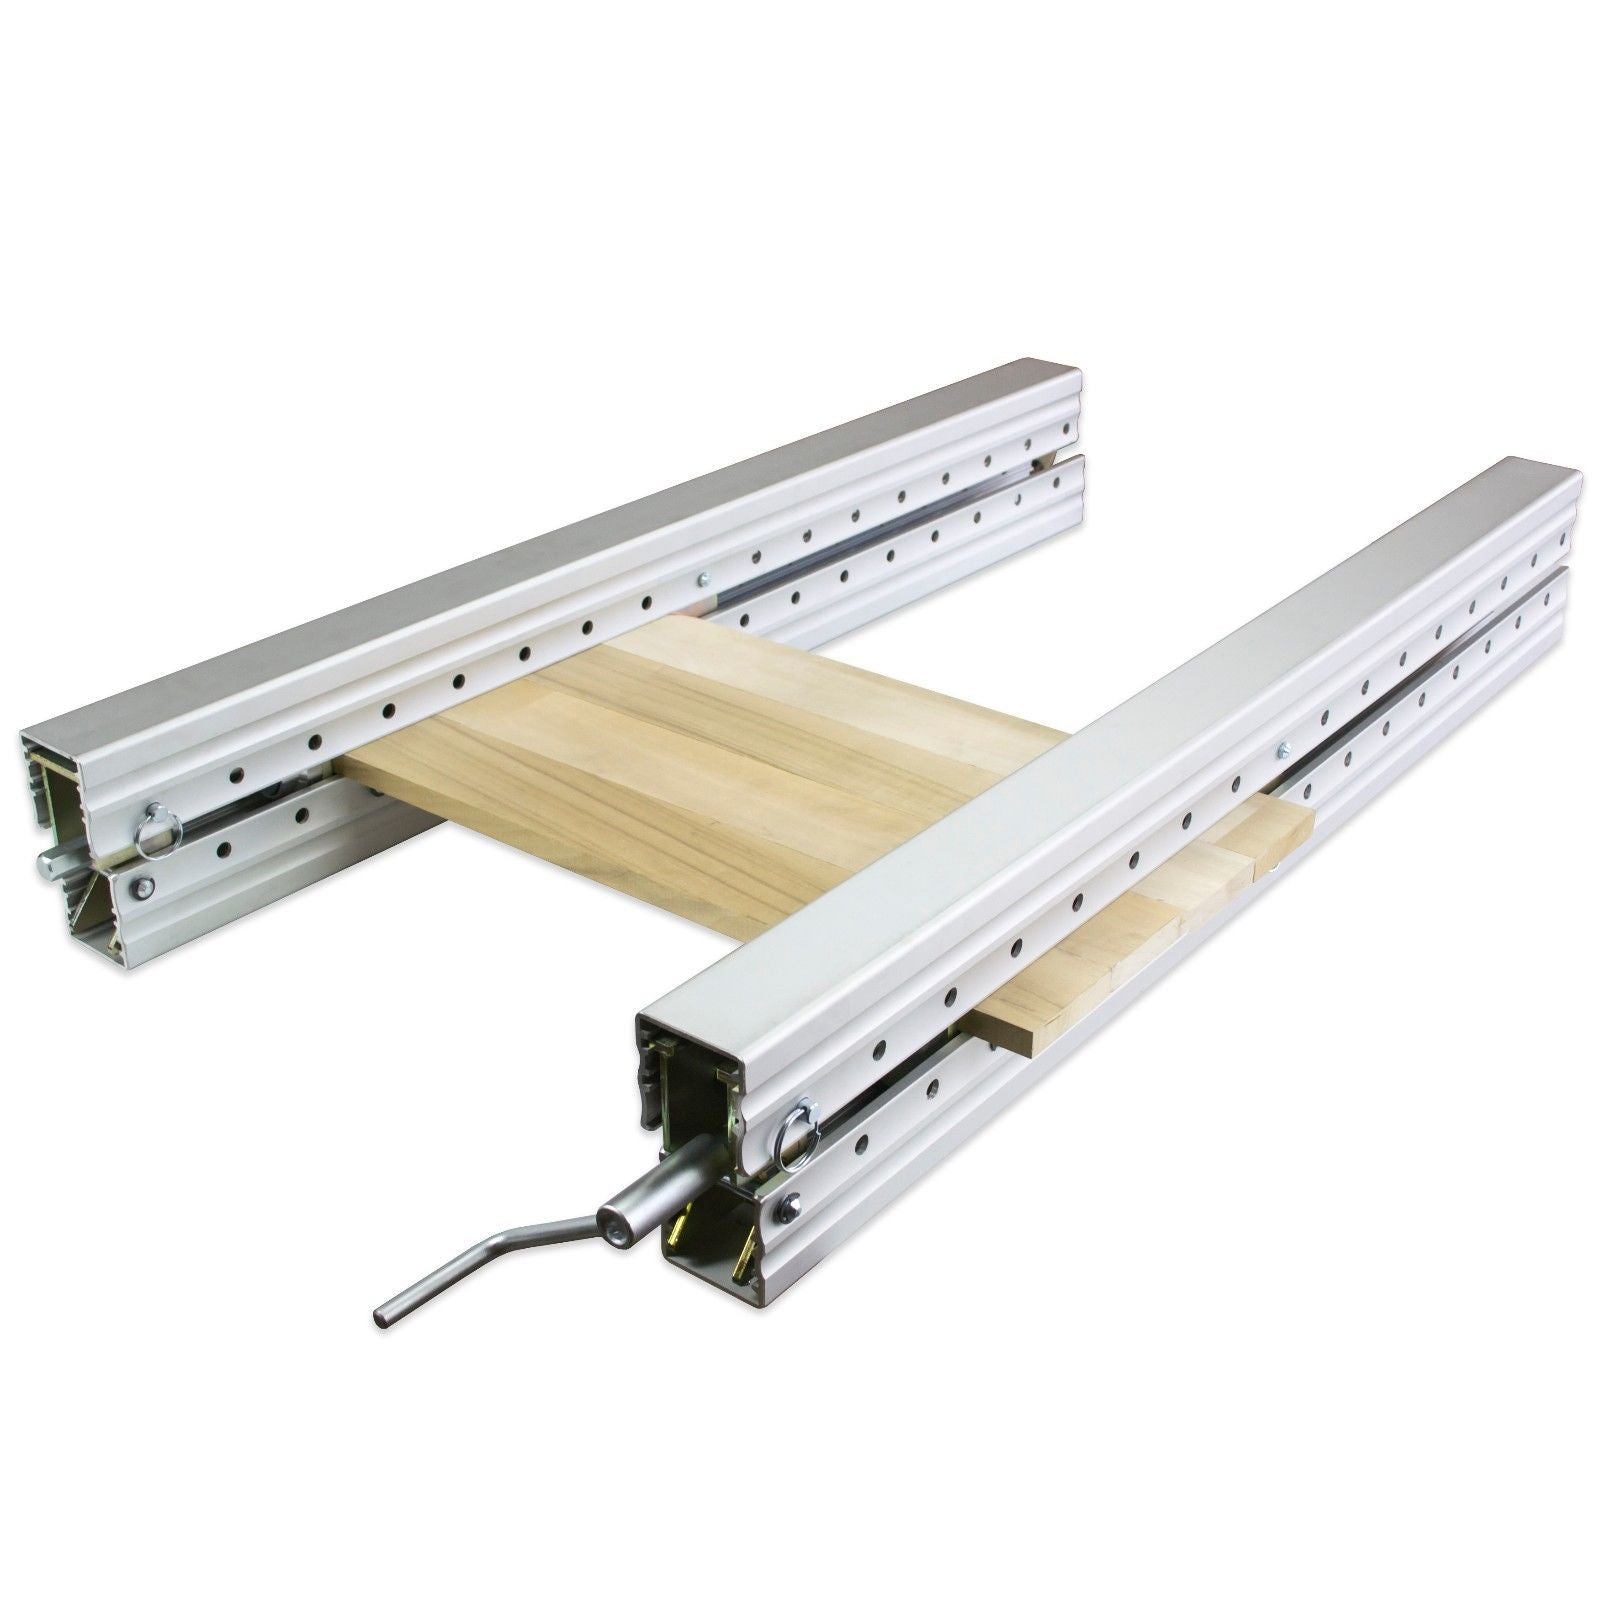 Frontline Wood Clamp System - Flatten & Clamp in One Action (920mm/36.2inch)